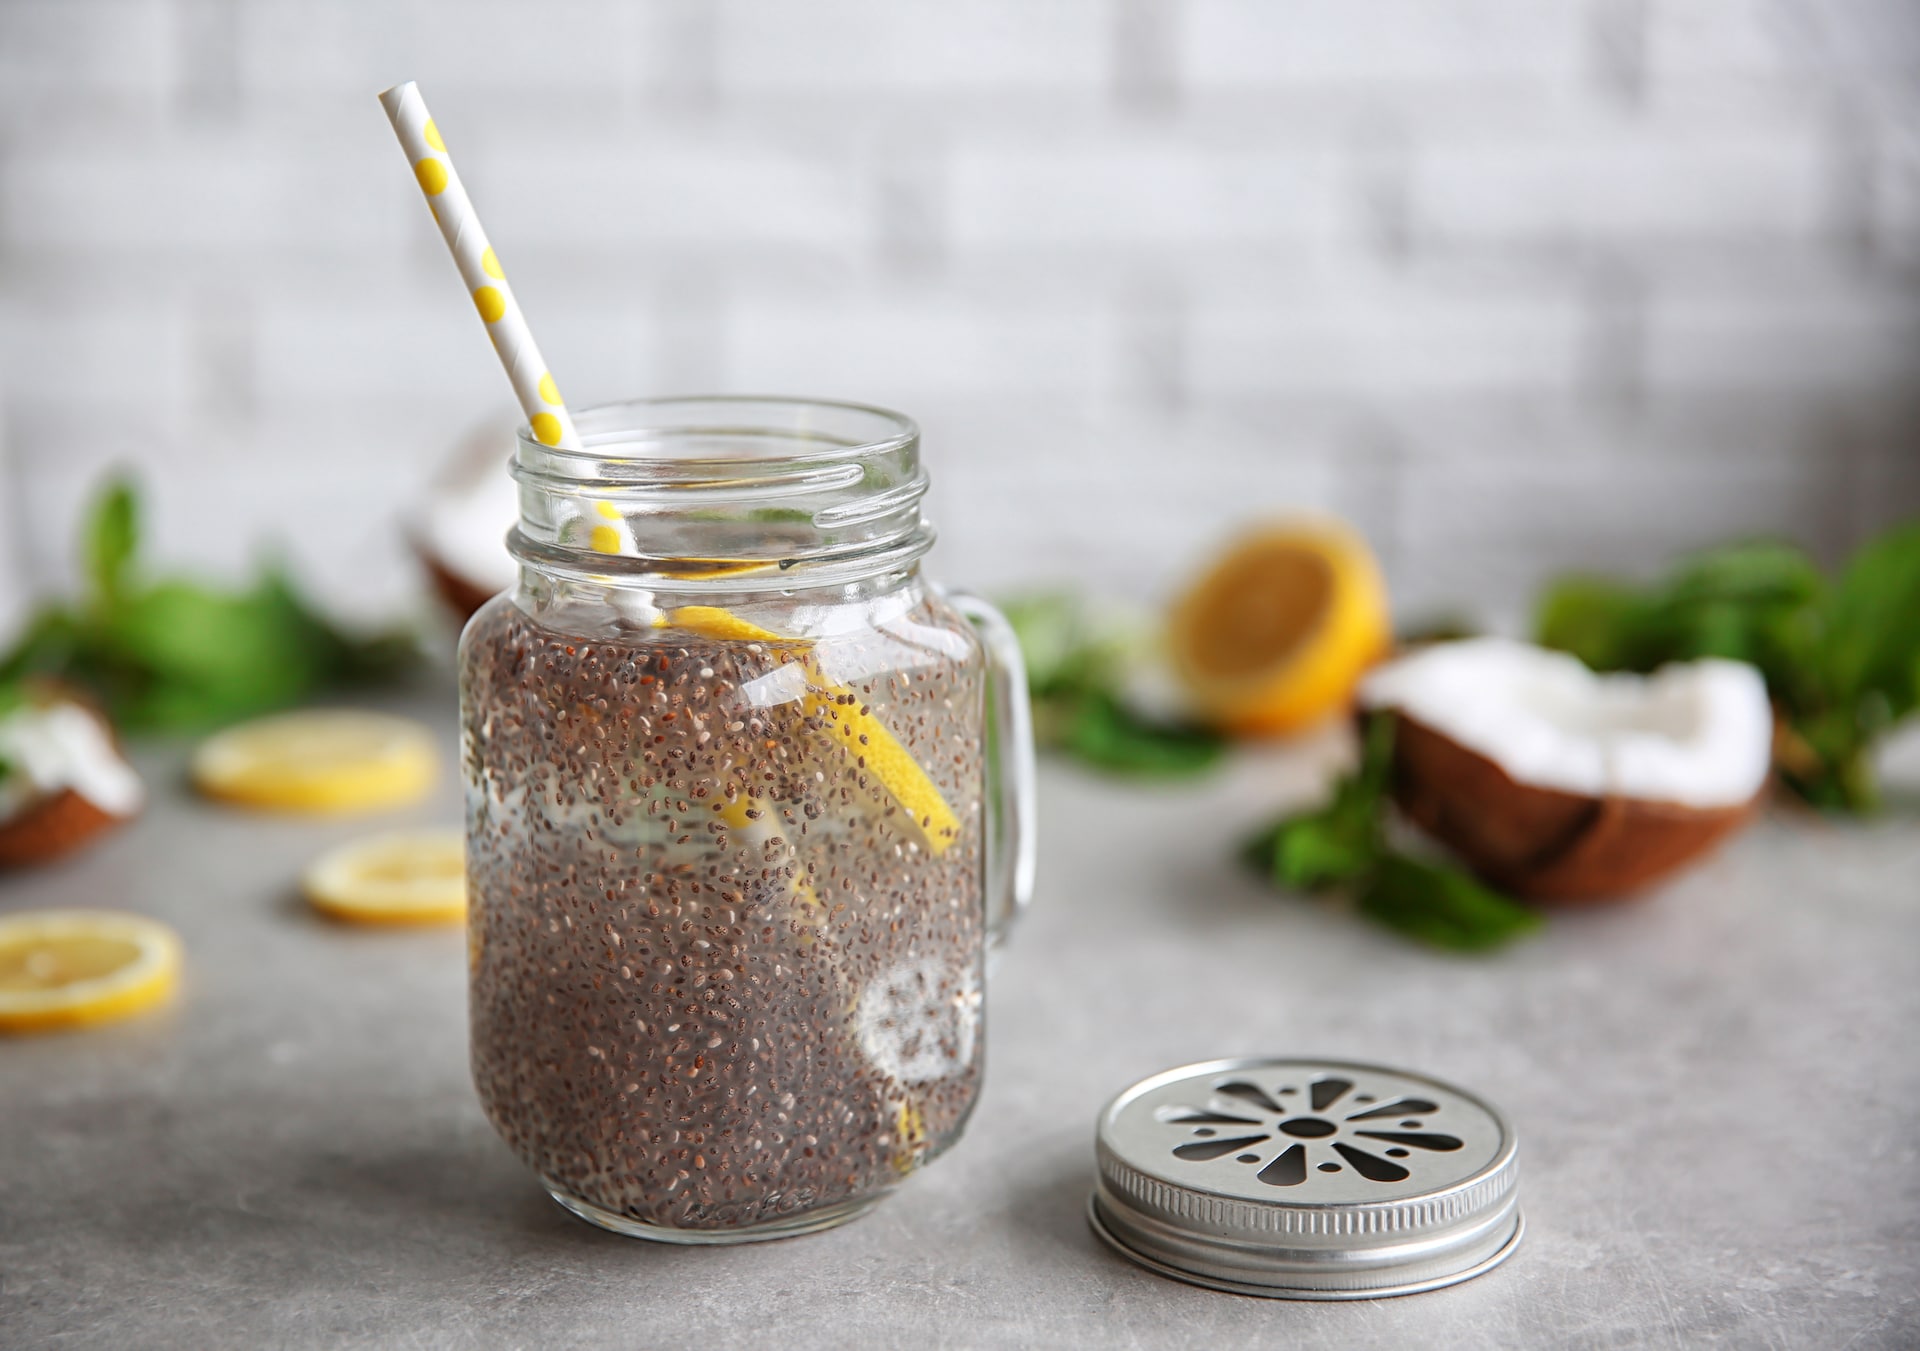 Chia seeds drink with lemon and mint in glass jar on table